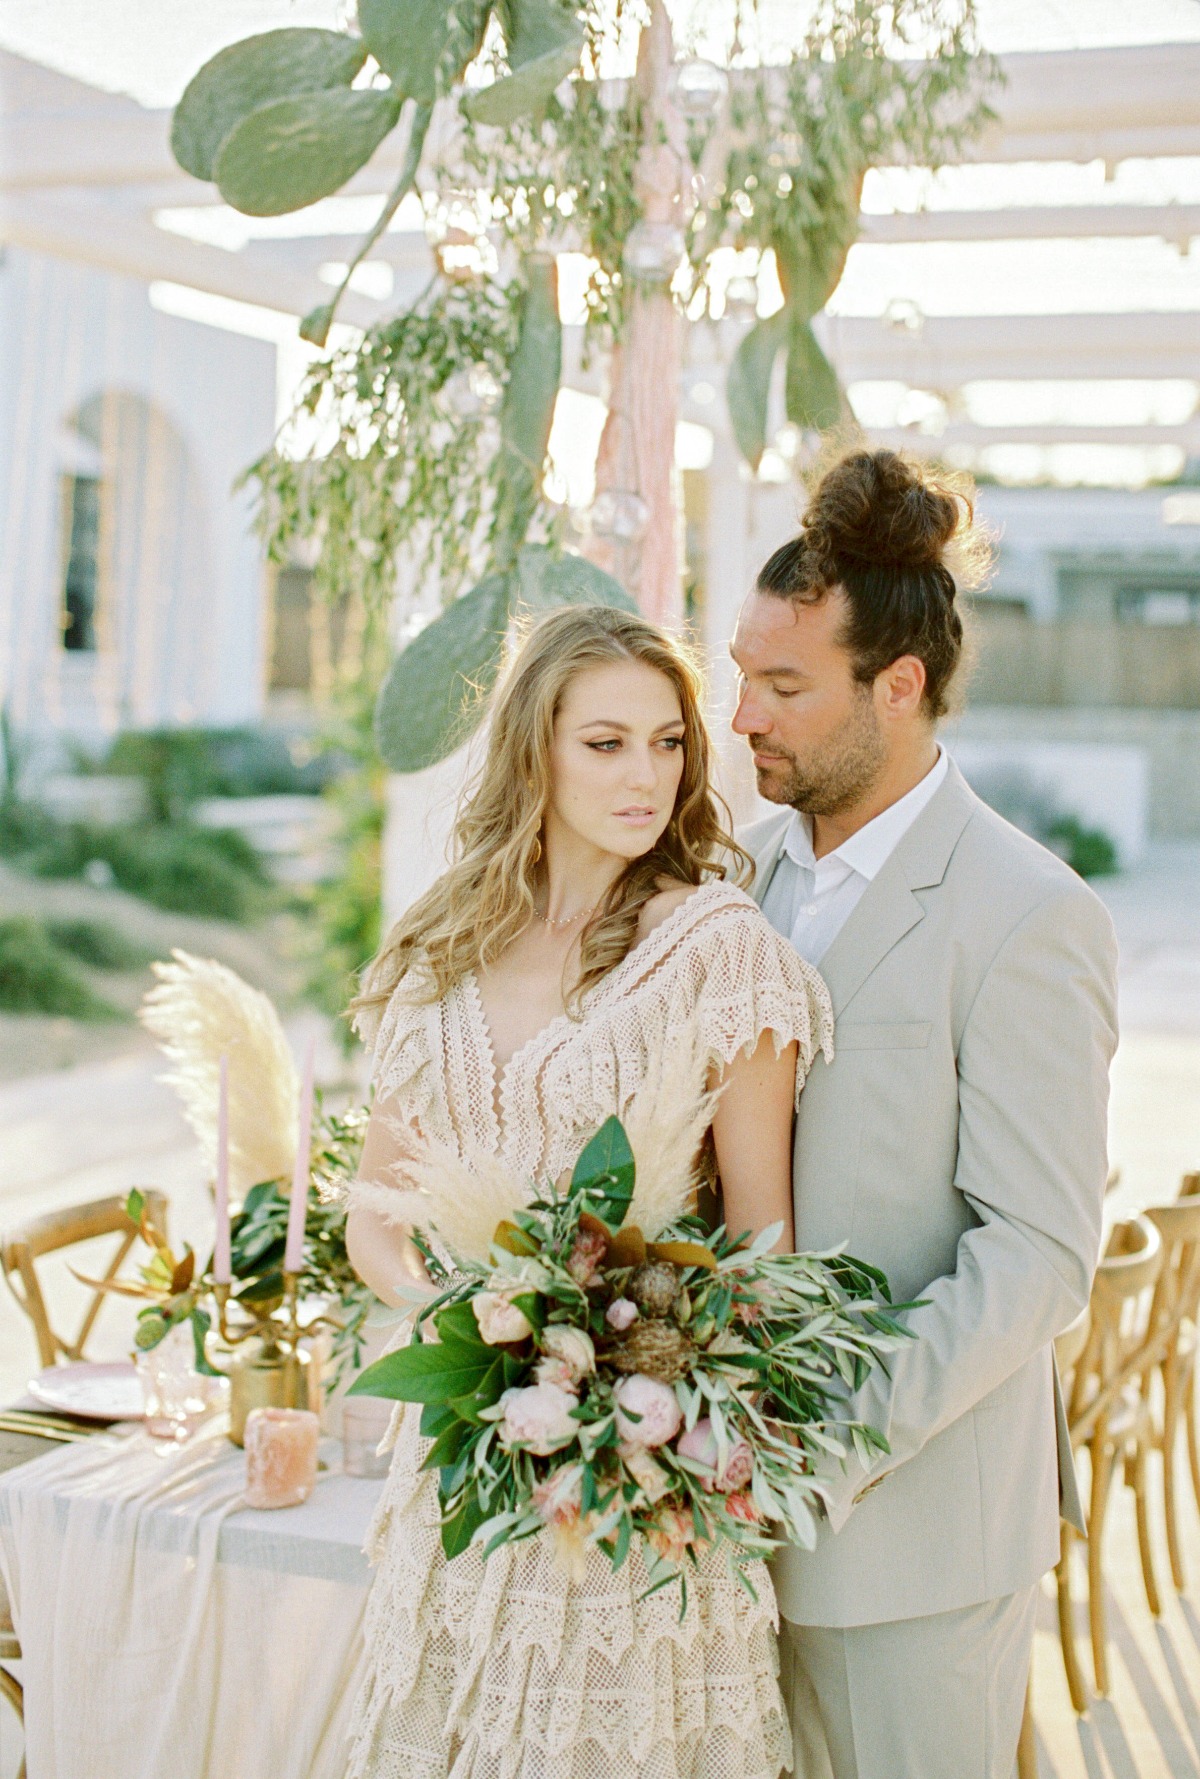 The Most Chic Beachy Wedding Day For Your Boho Heartt